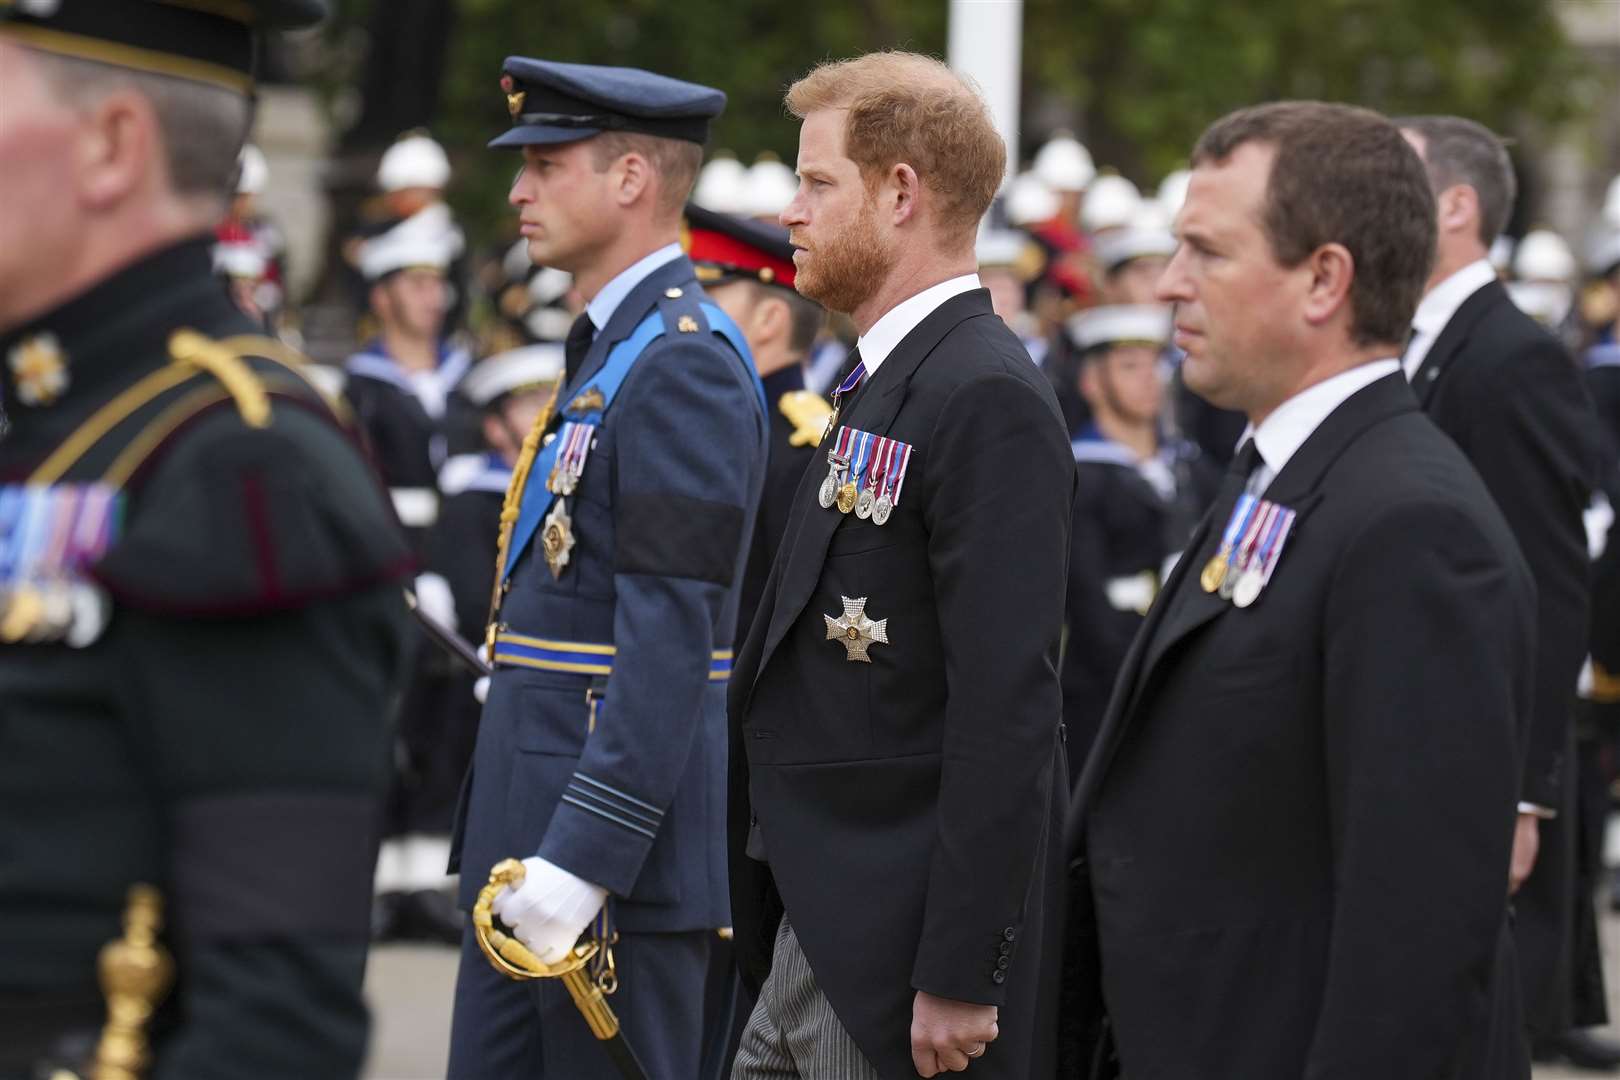 The Prince of Wales, the Duke of Sussex and Peter Phillips following Queen Elizabeth II’s coffin on the day of her funeral (Emilio Morenatti/PA)